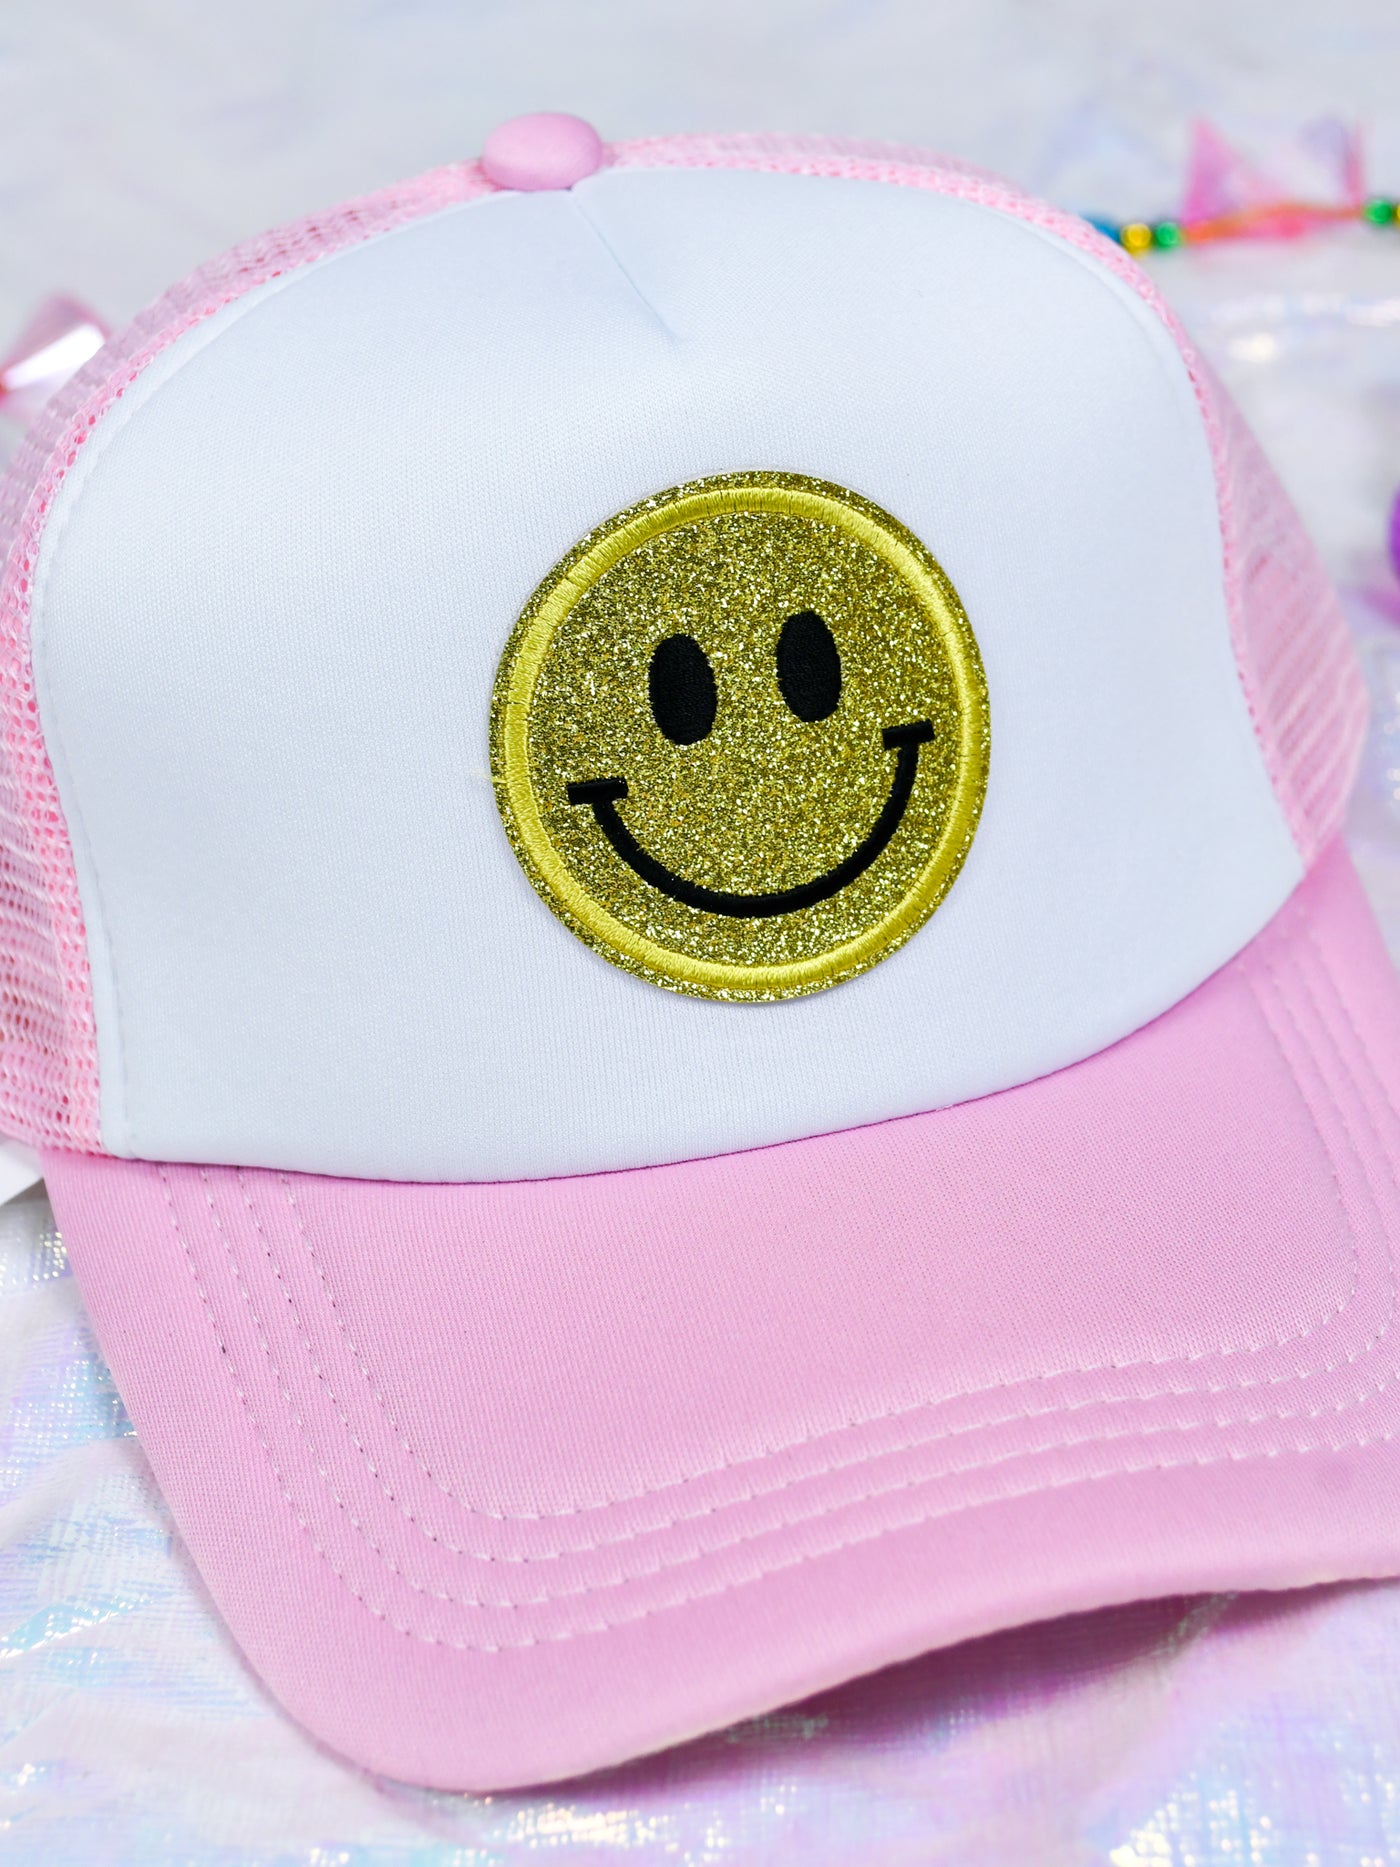 A model wearing a pink trucker hat with a yellow smiley face on the front.